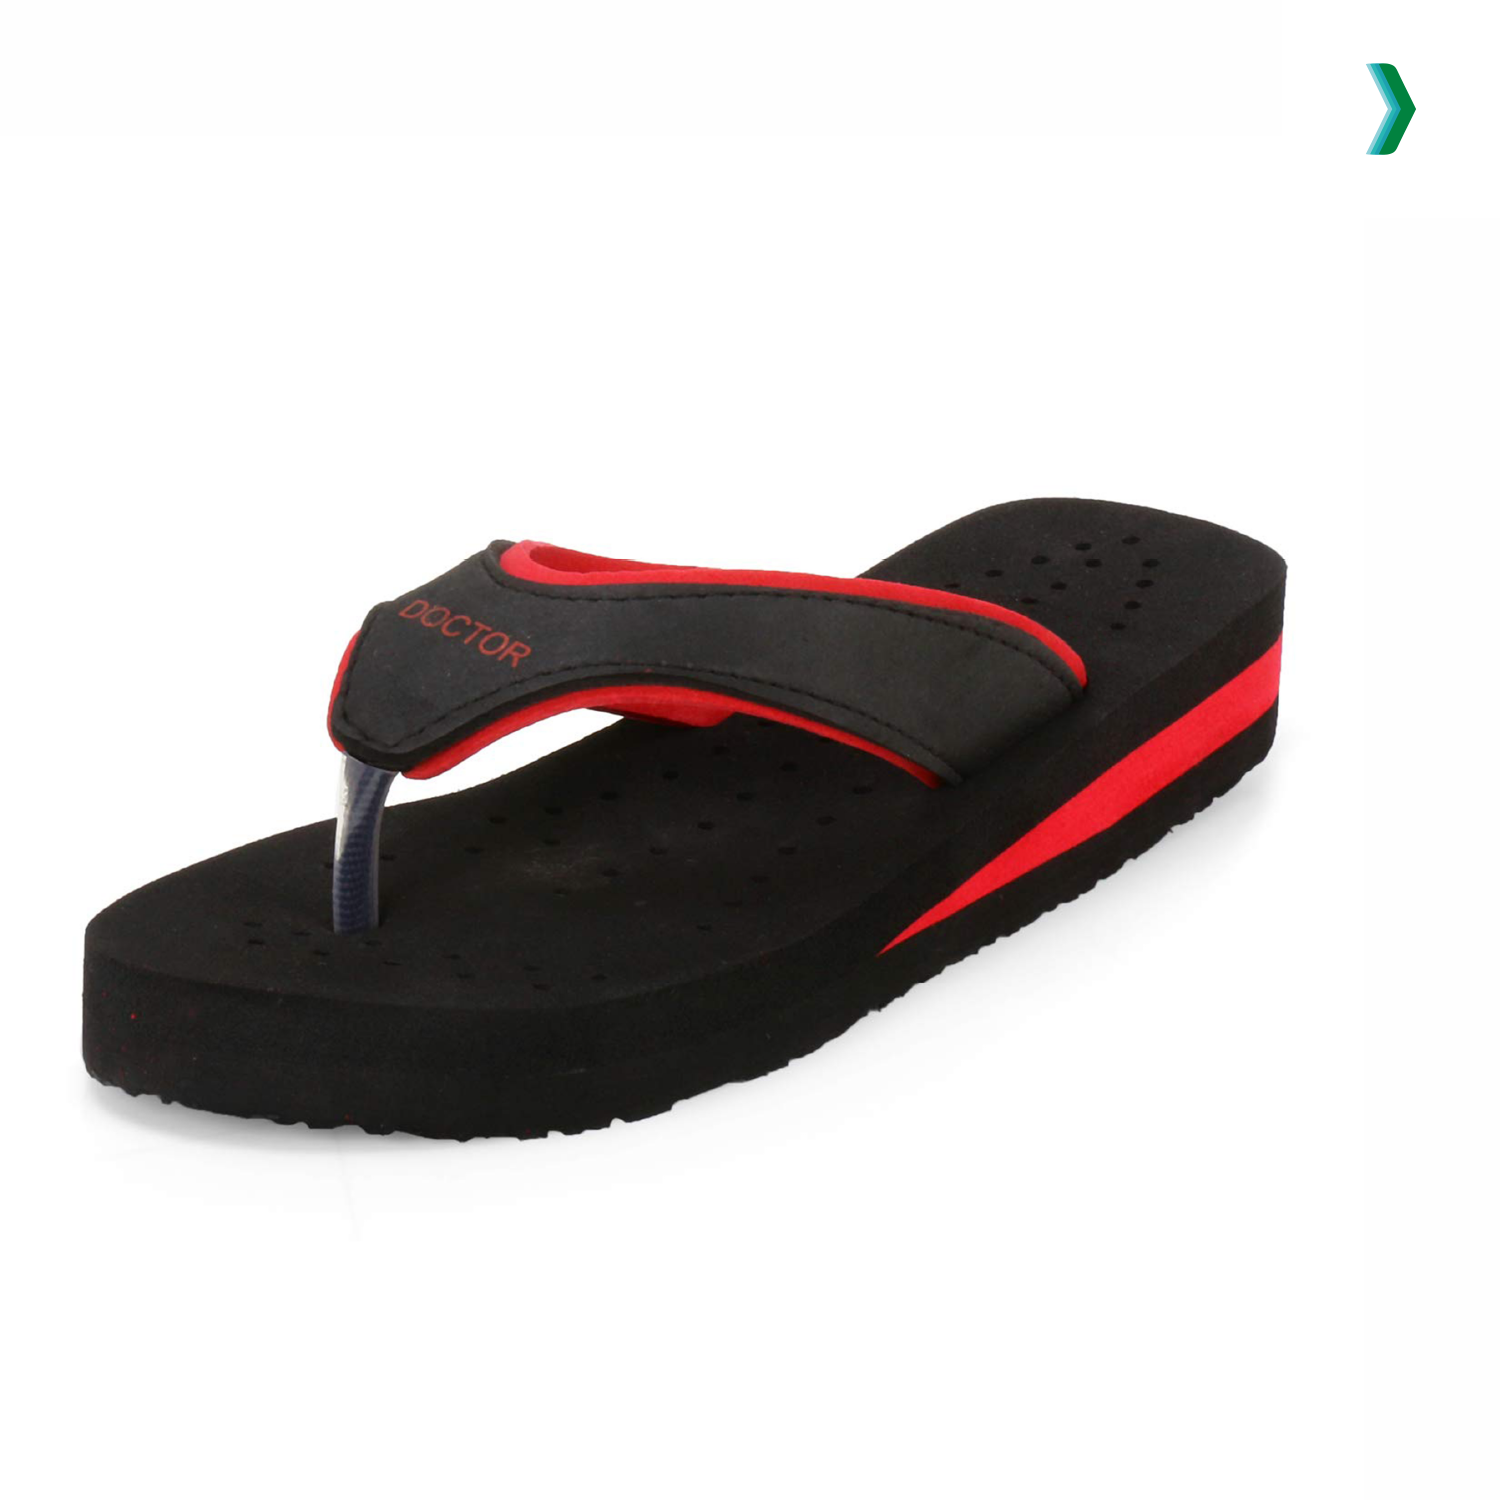 orthopedic slippers for women, ortho chappal for ladies